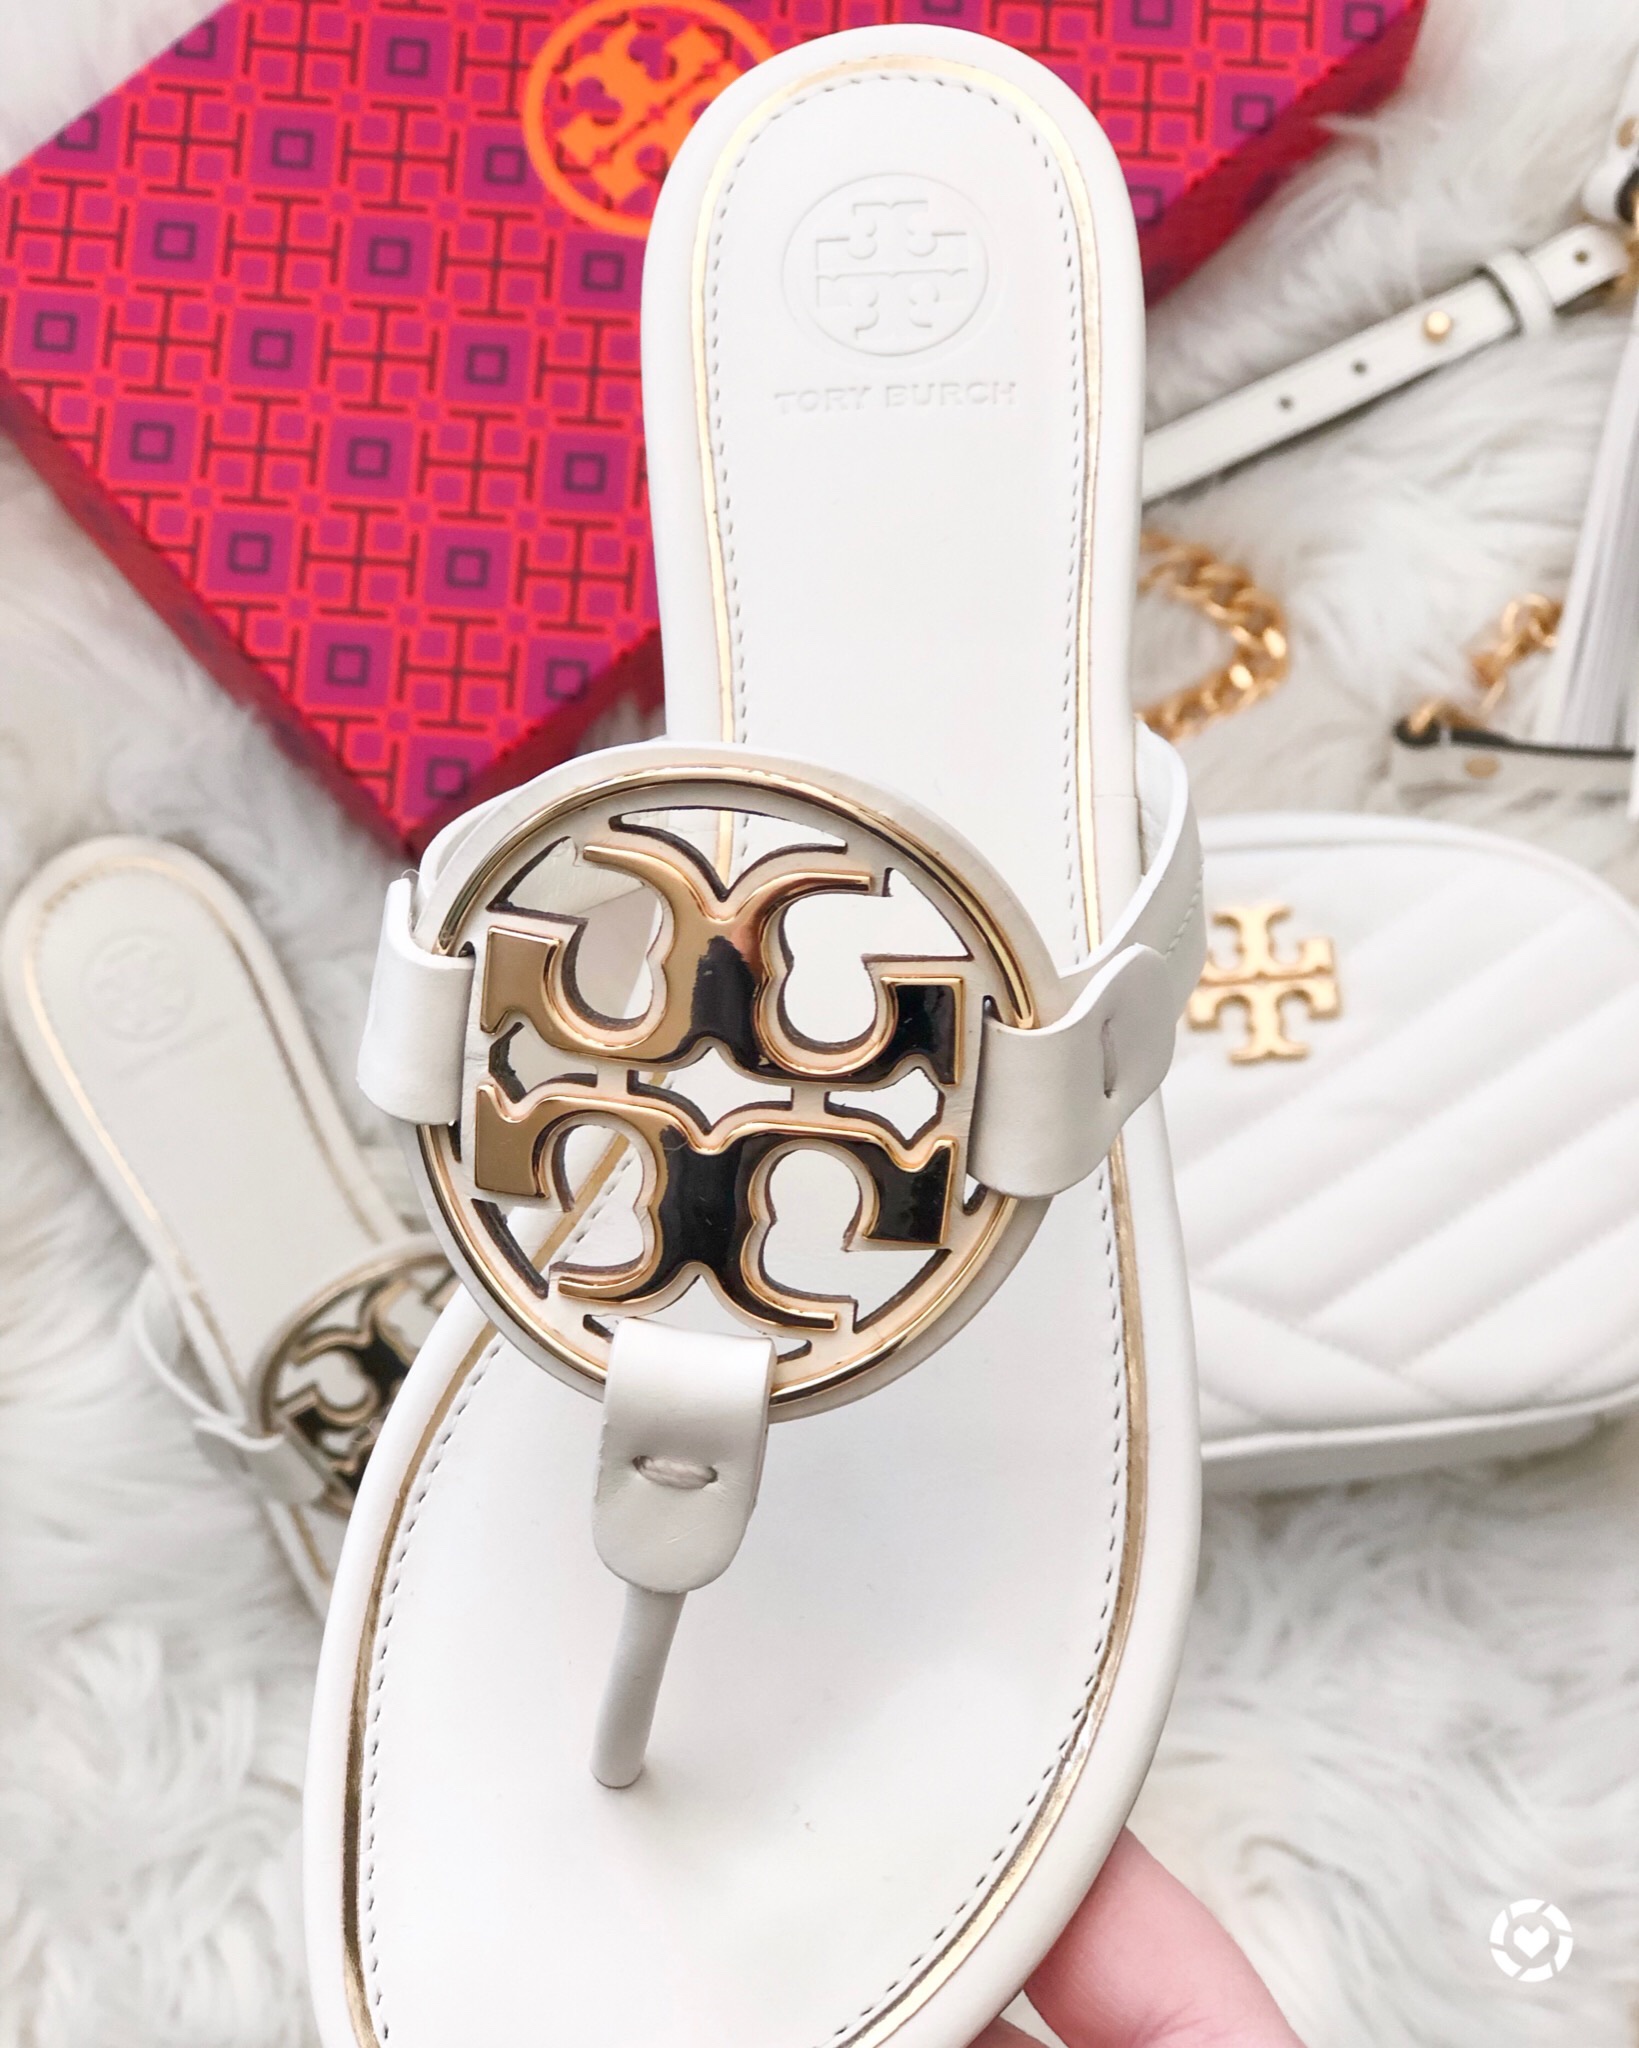 New Tory Burch Miller Cloud Sandals Review - The Double Take Girls